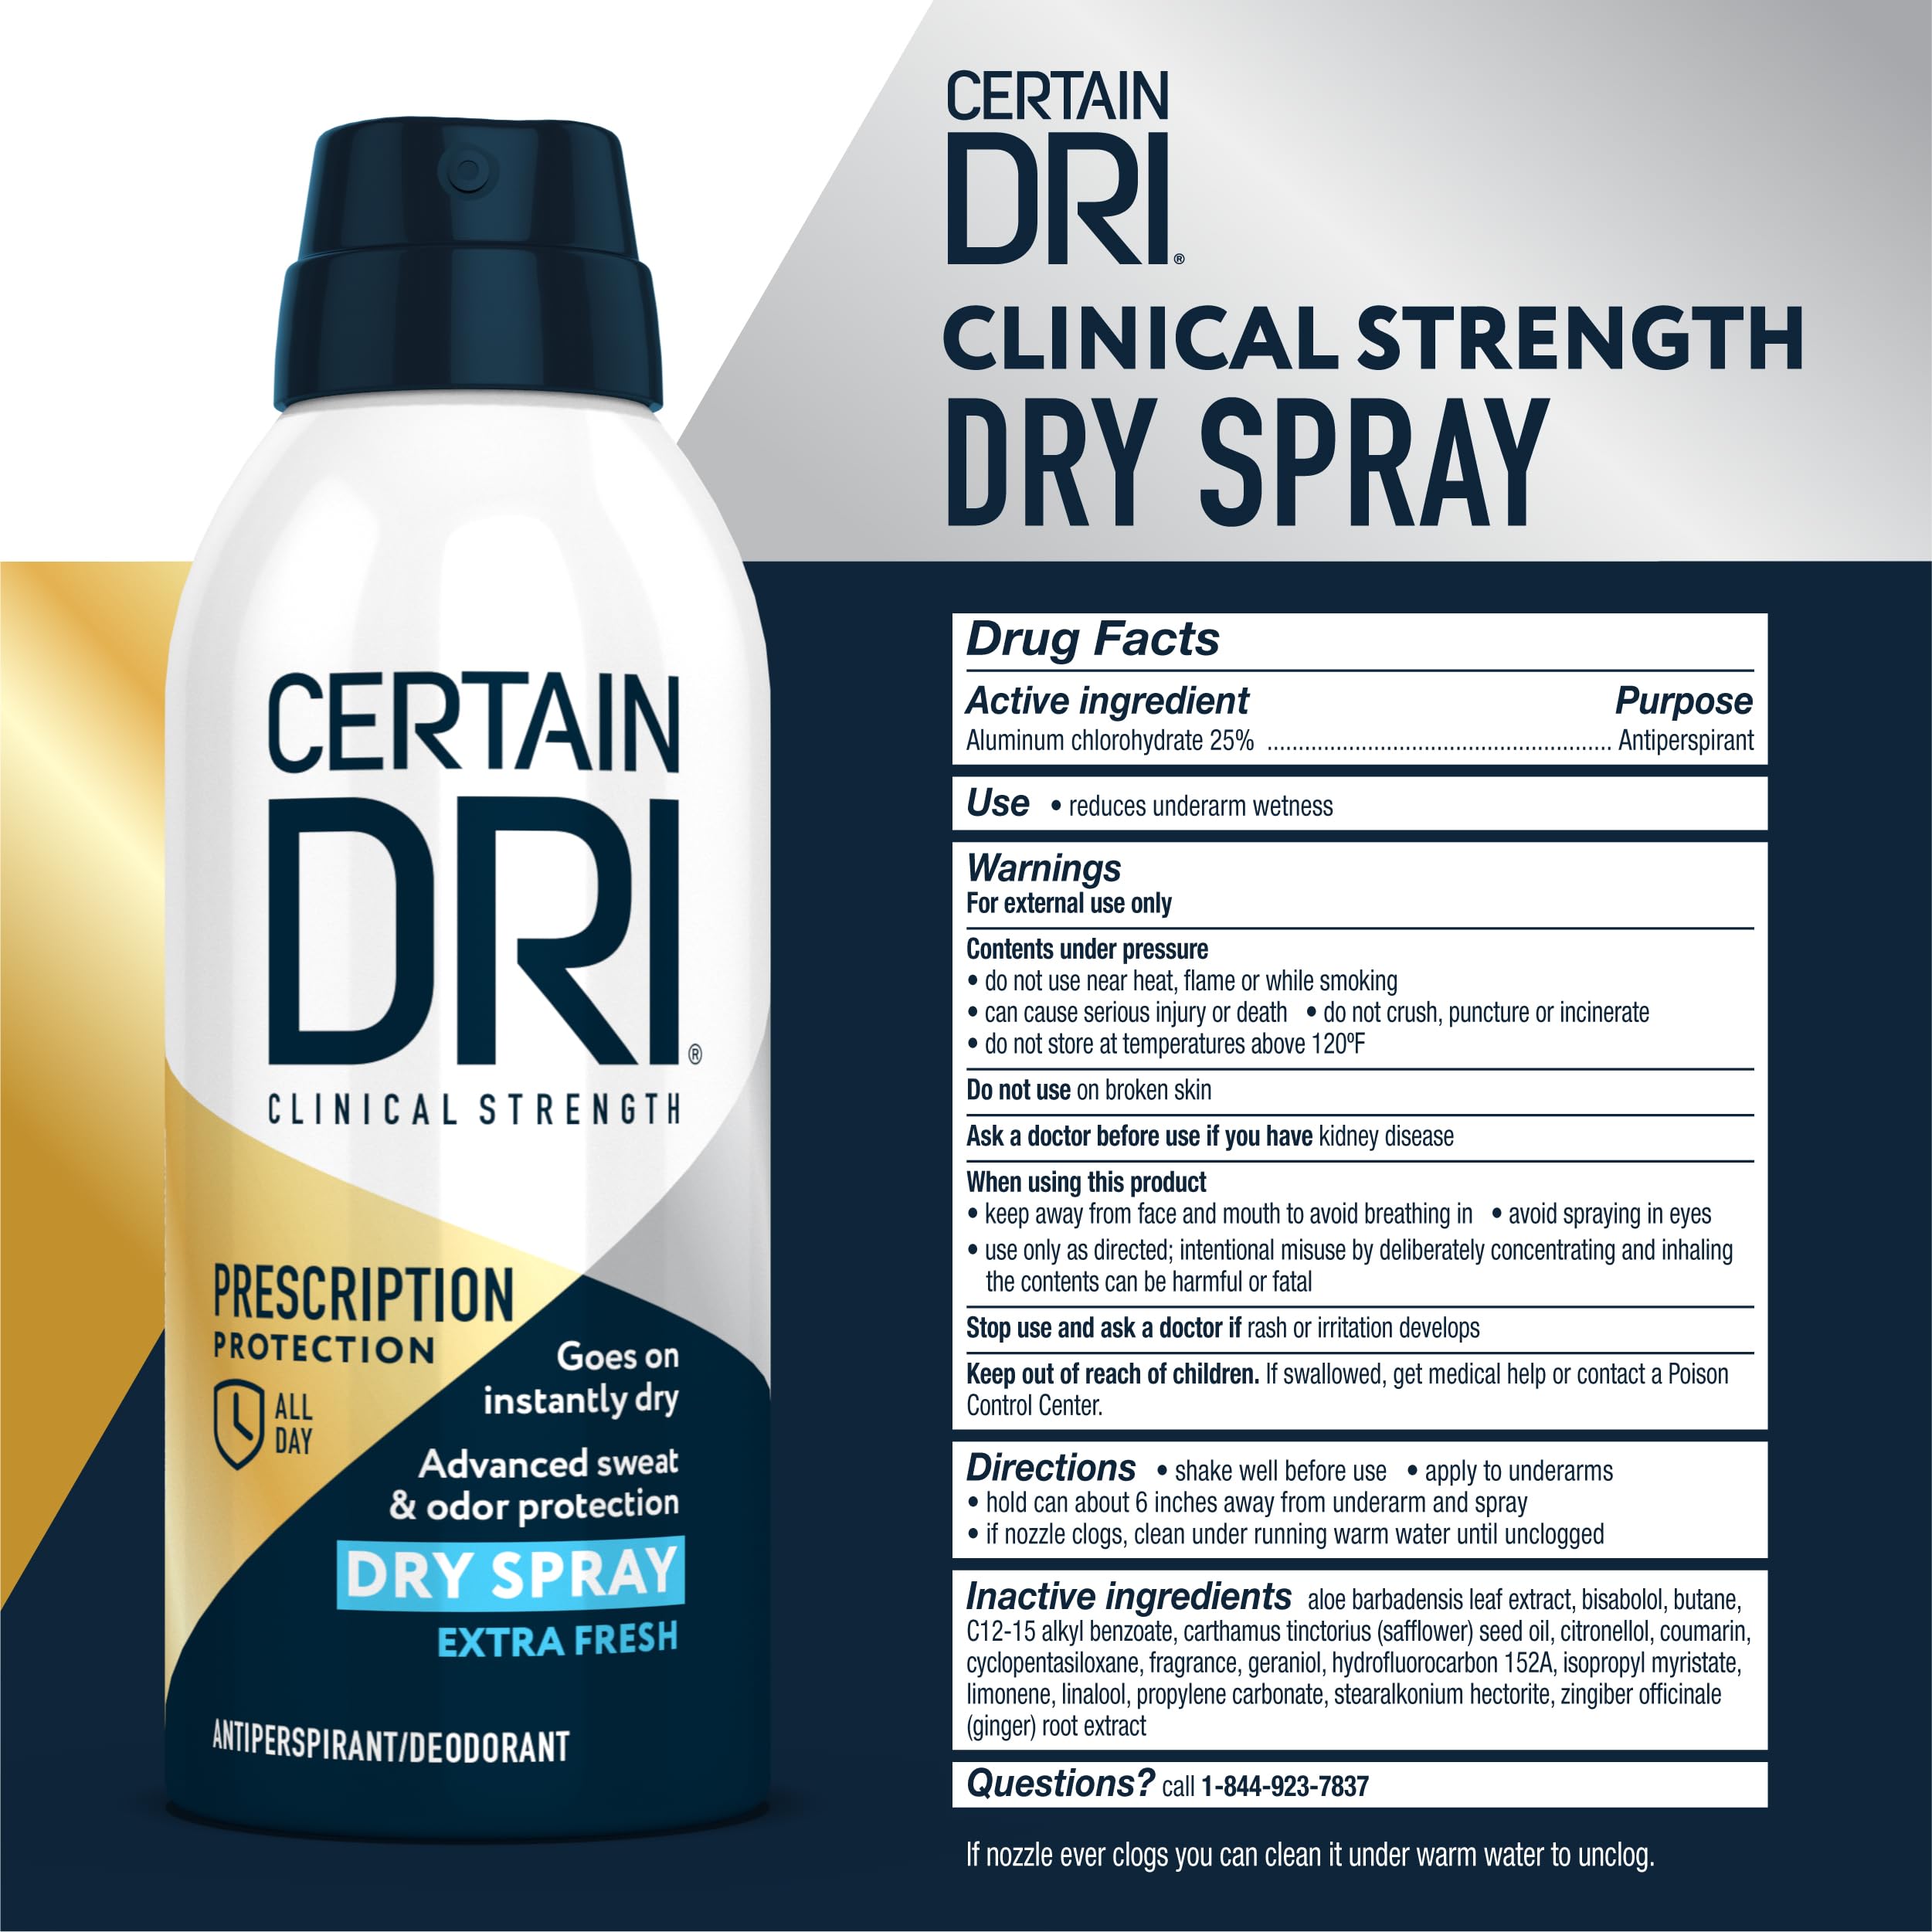 Certain Dri Prescription Strength Clinical Antiperspirant Deodorant Dry Spray for Men and Women, Fast Acting Protection from Excessive Sweating, 4.2 oz